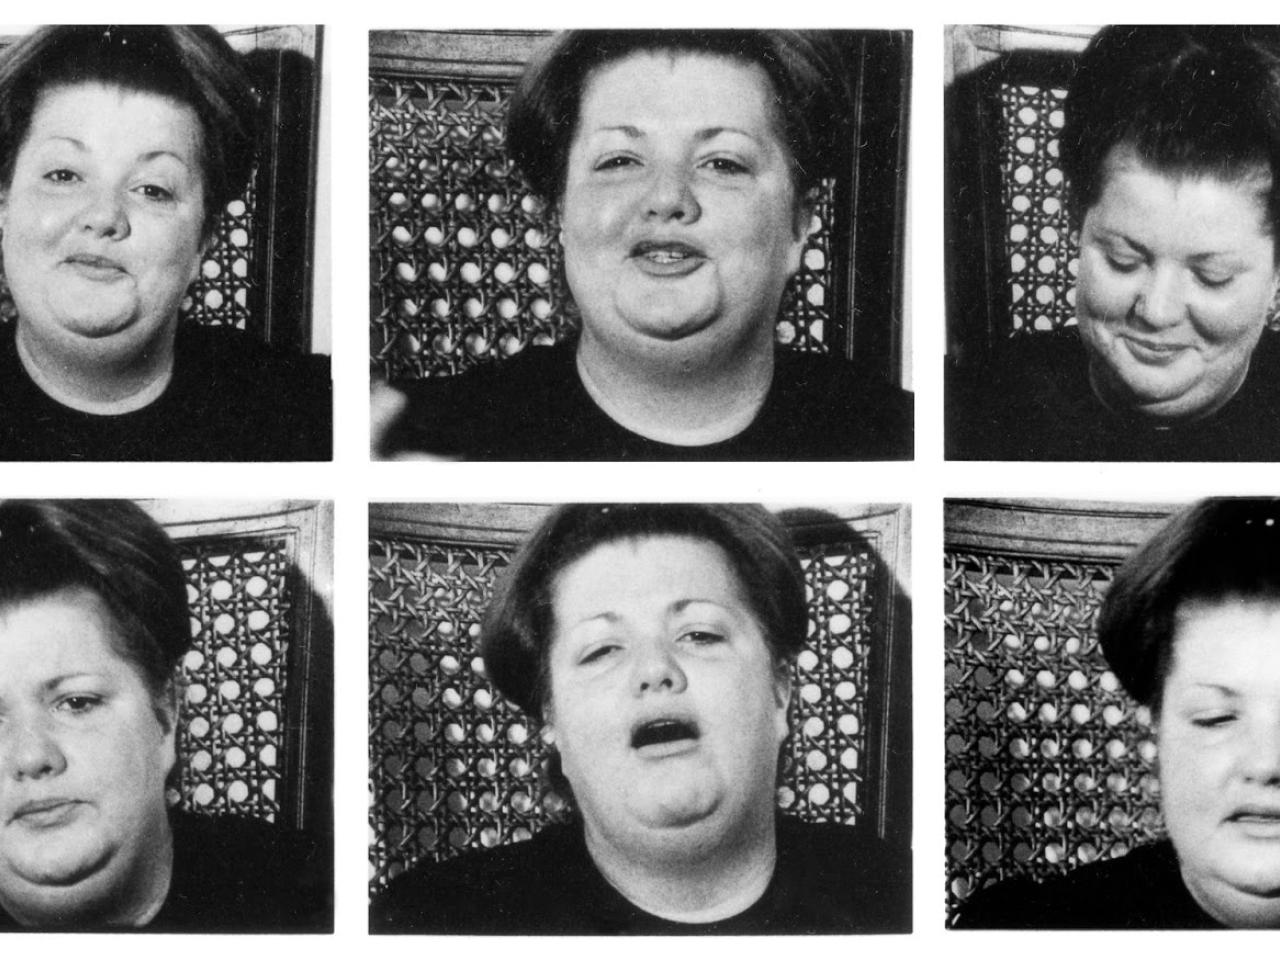 A composite image made up of six black and white photos of the same person. She is round-faced and light skinned with arched eyebrows and short dark hair pulled back in a barrette on top of her head. In each photo she has a different expression.